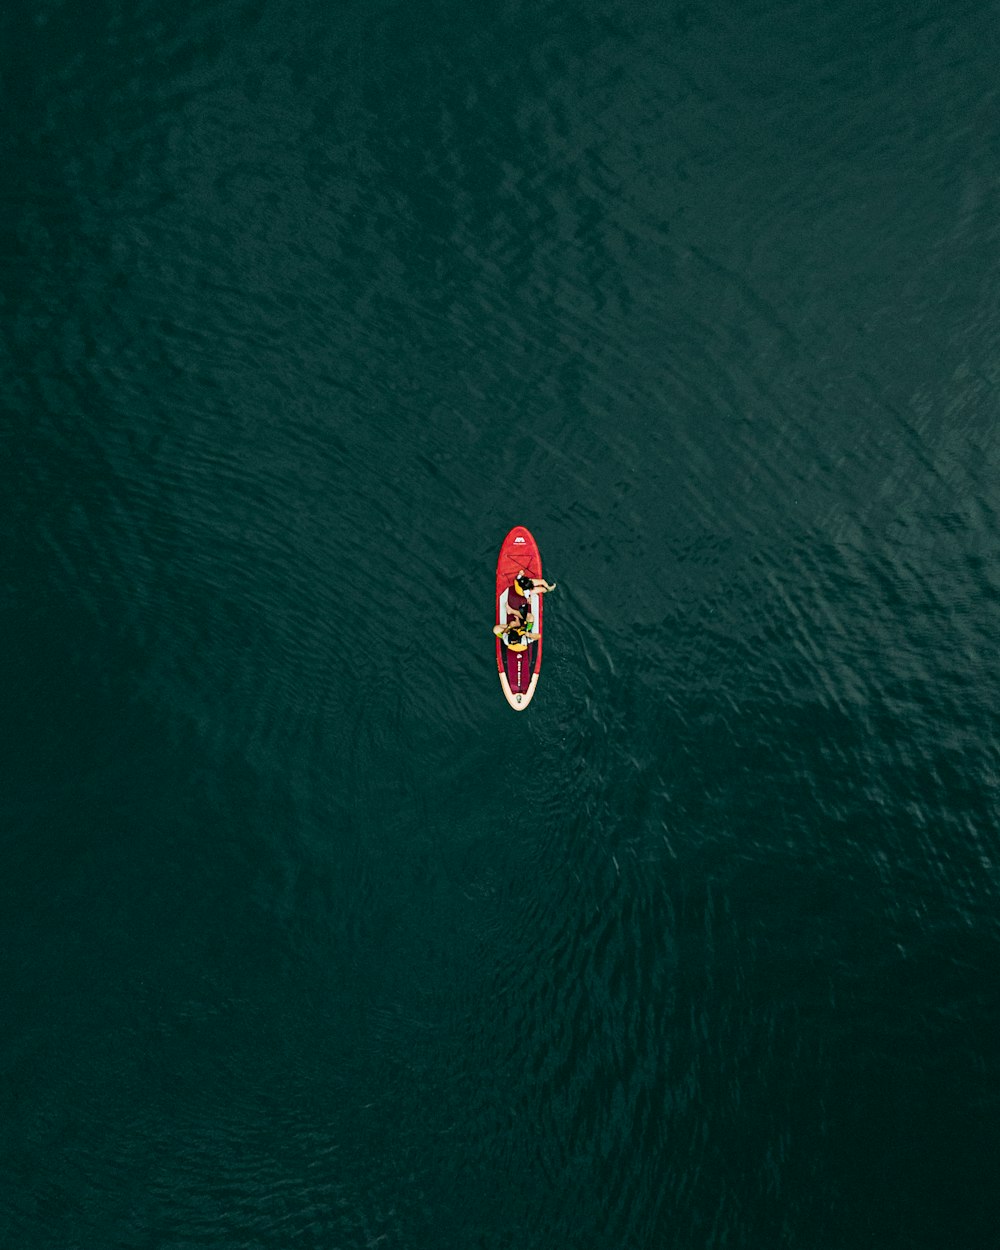 a person in a red kayak in the middle of a body of water